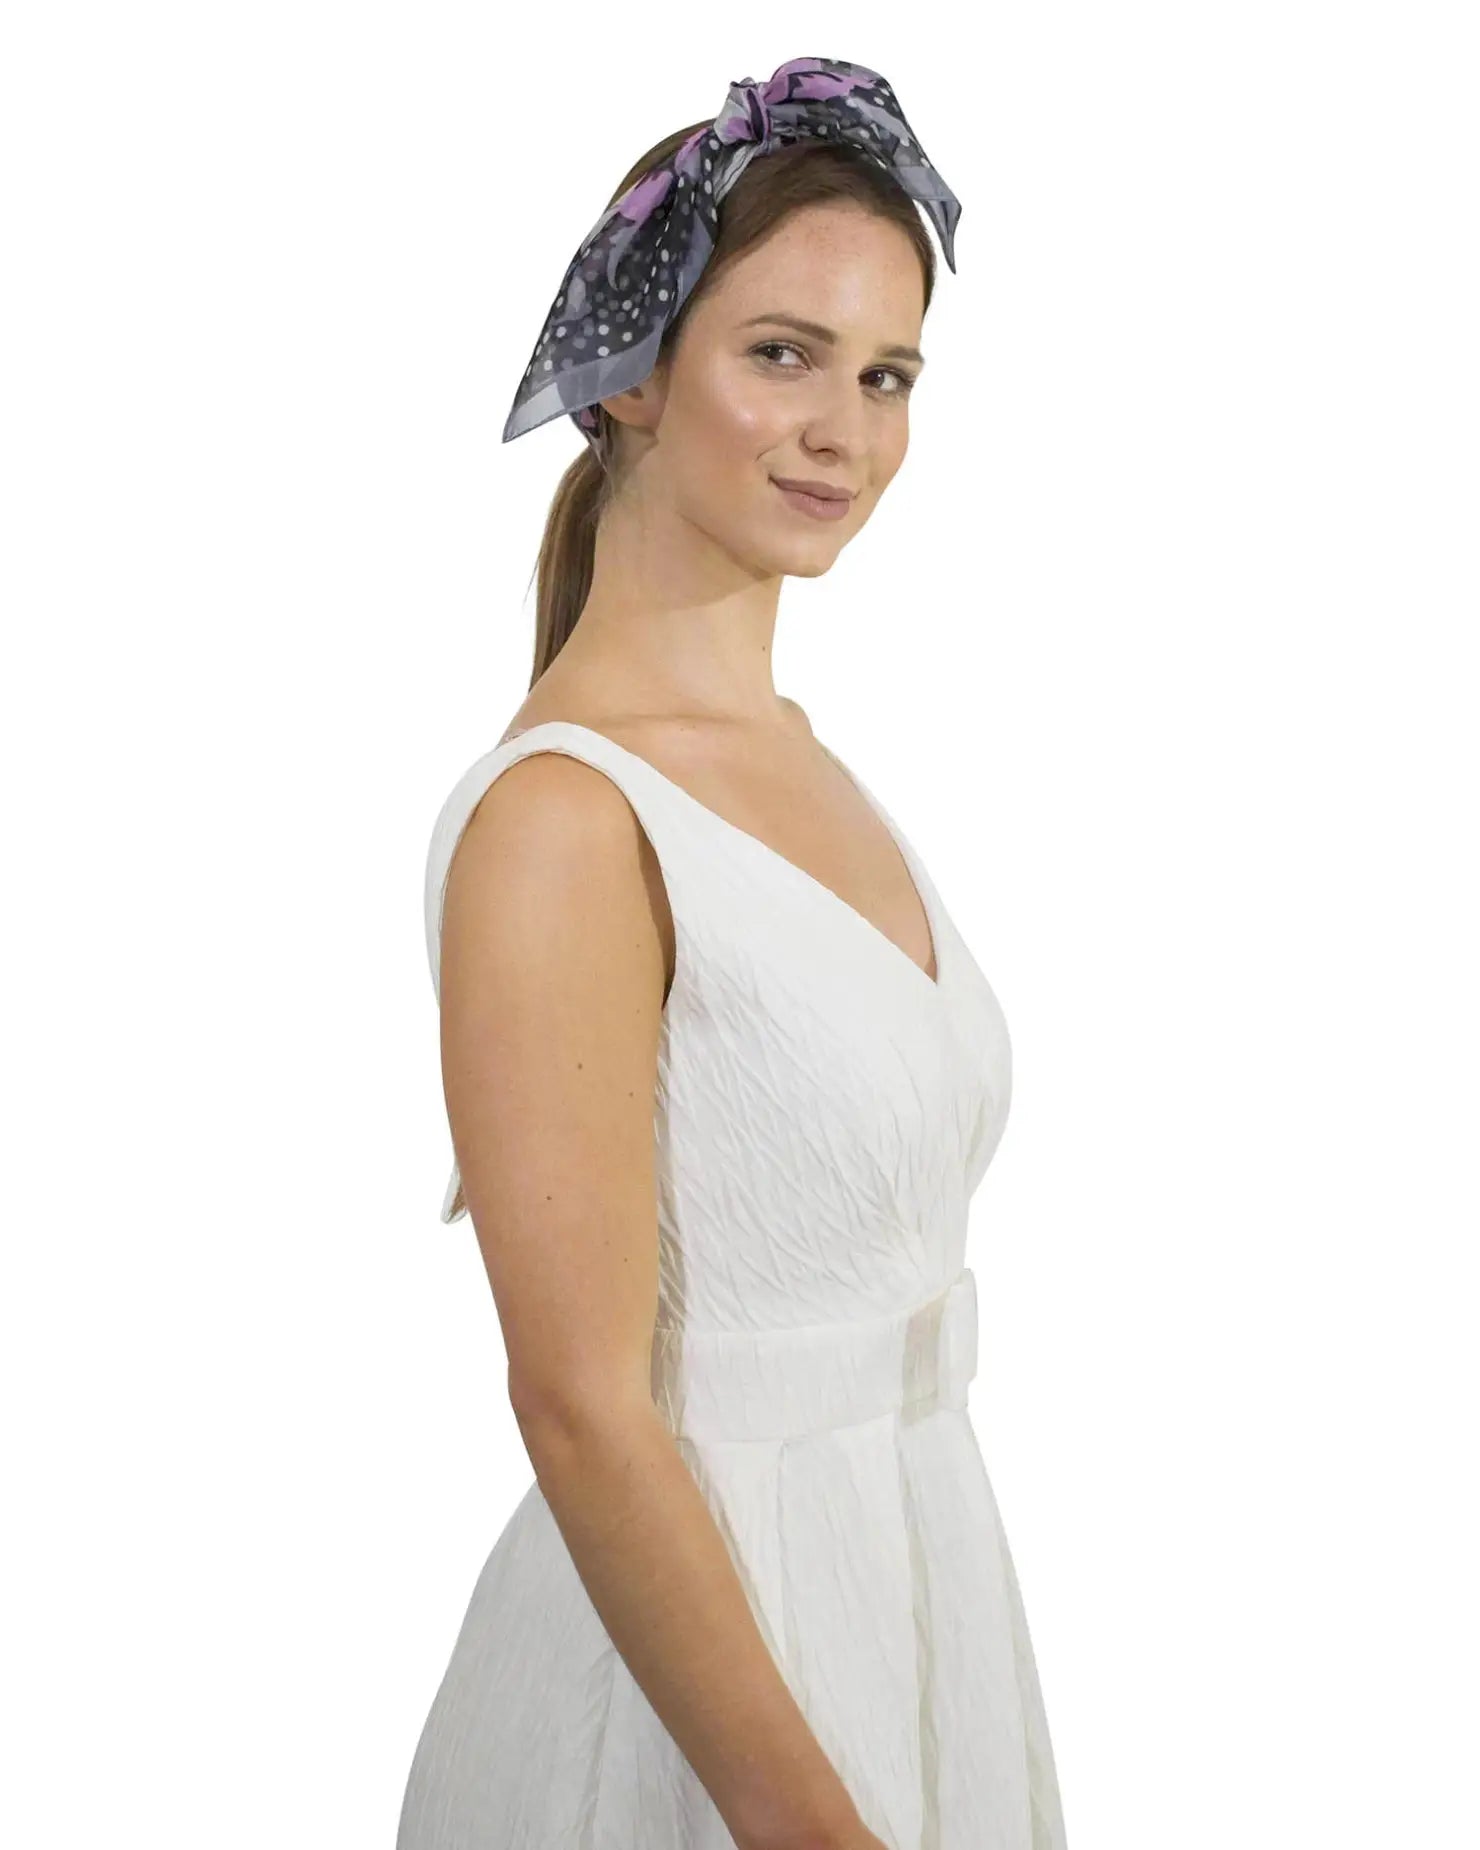 Woman wearing white dress and purple headband showcasing Charming Polka Dot & Floral Small Square Scarf.